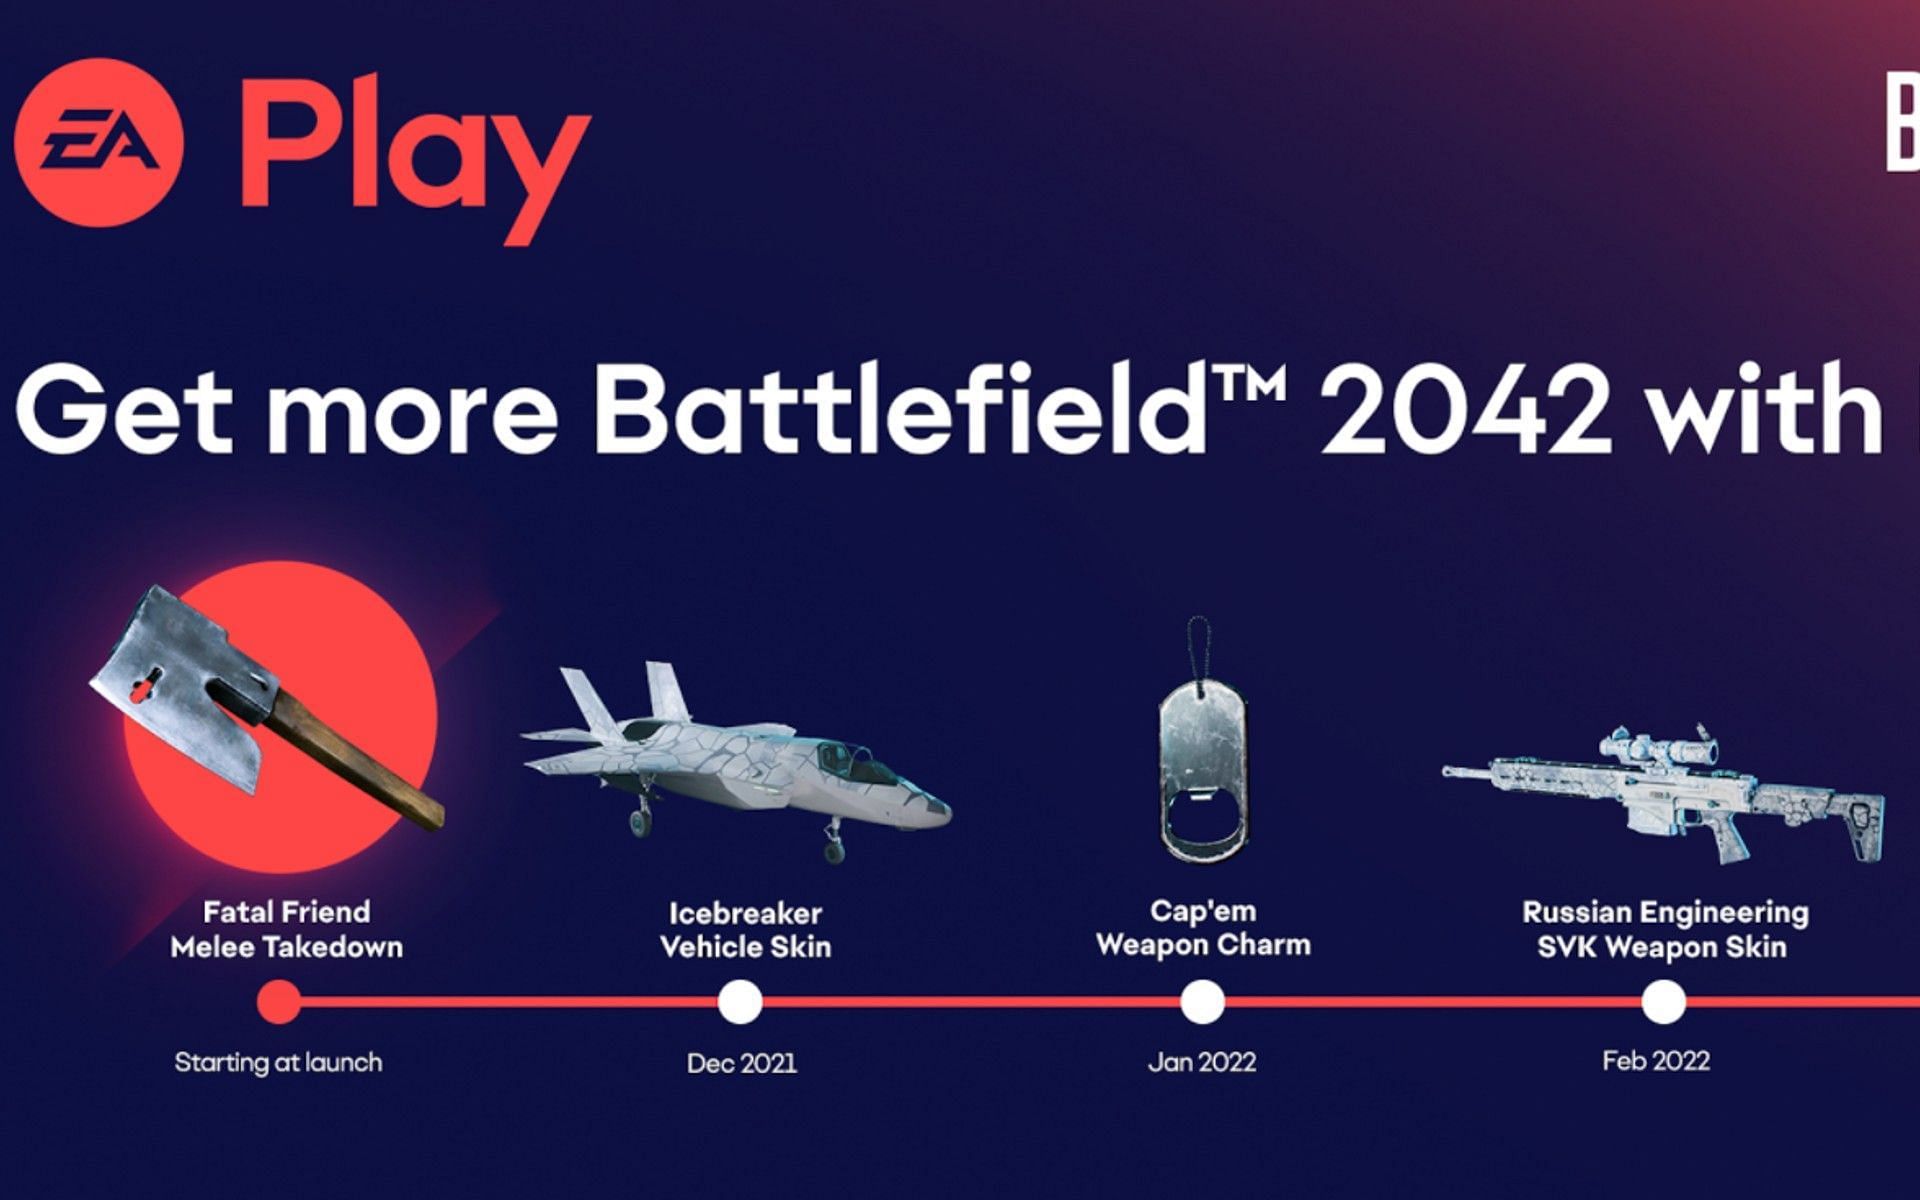 EA Play will give additional Battlefield 2042 rewards